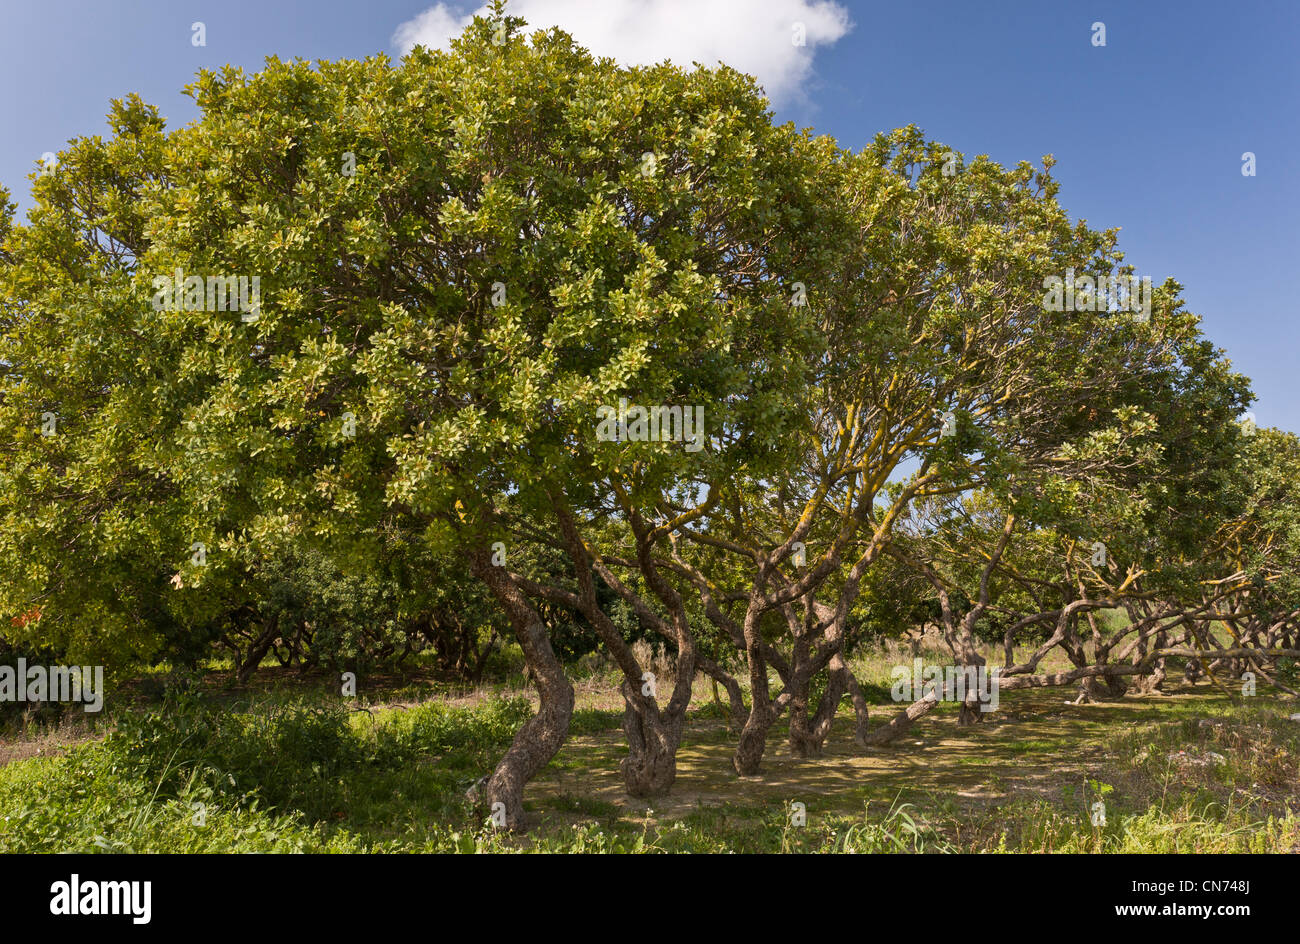 Mastic trees, Pistacia lentiscus var chia in cultivation on the greek island of Chios, Greece. Stock Photo